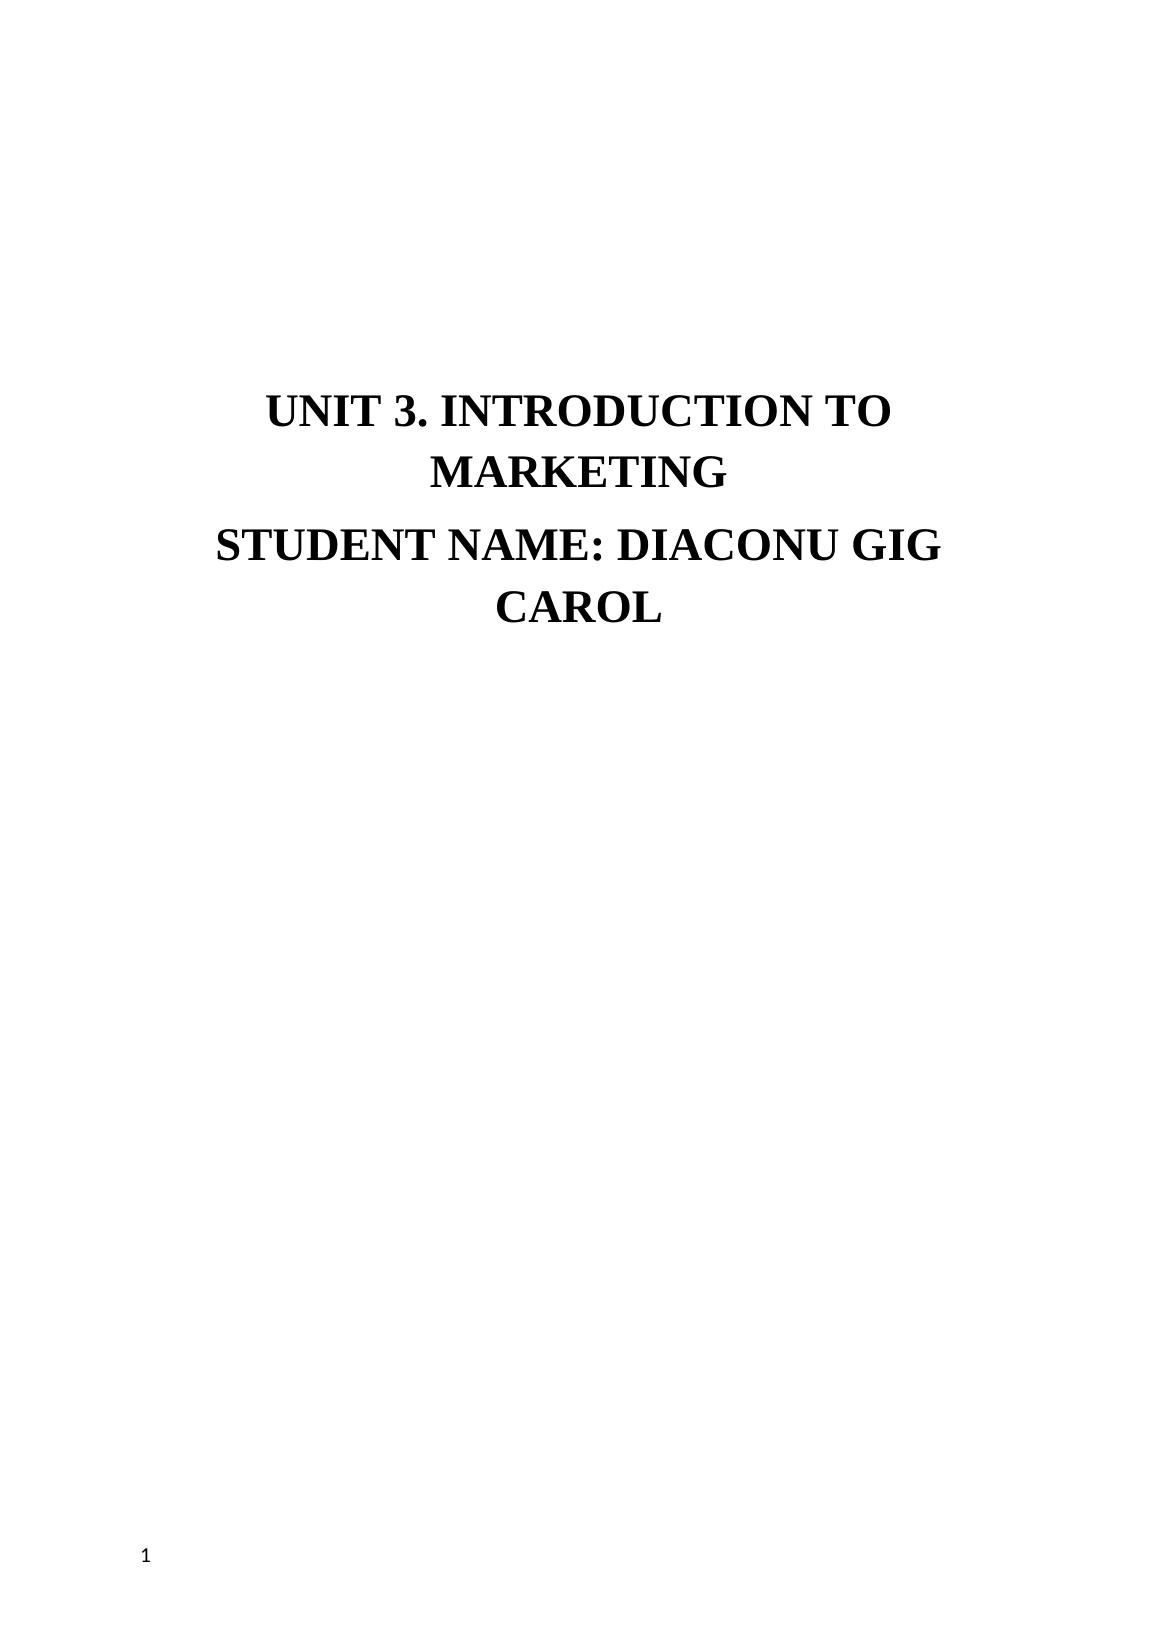 Assignment Introduction of Marketing_1